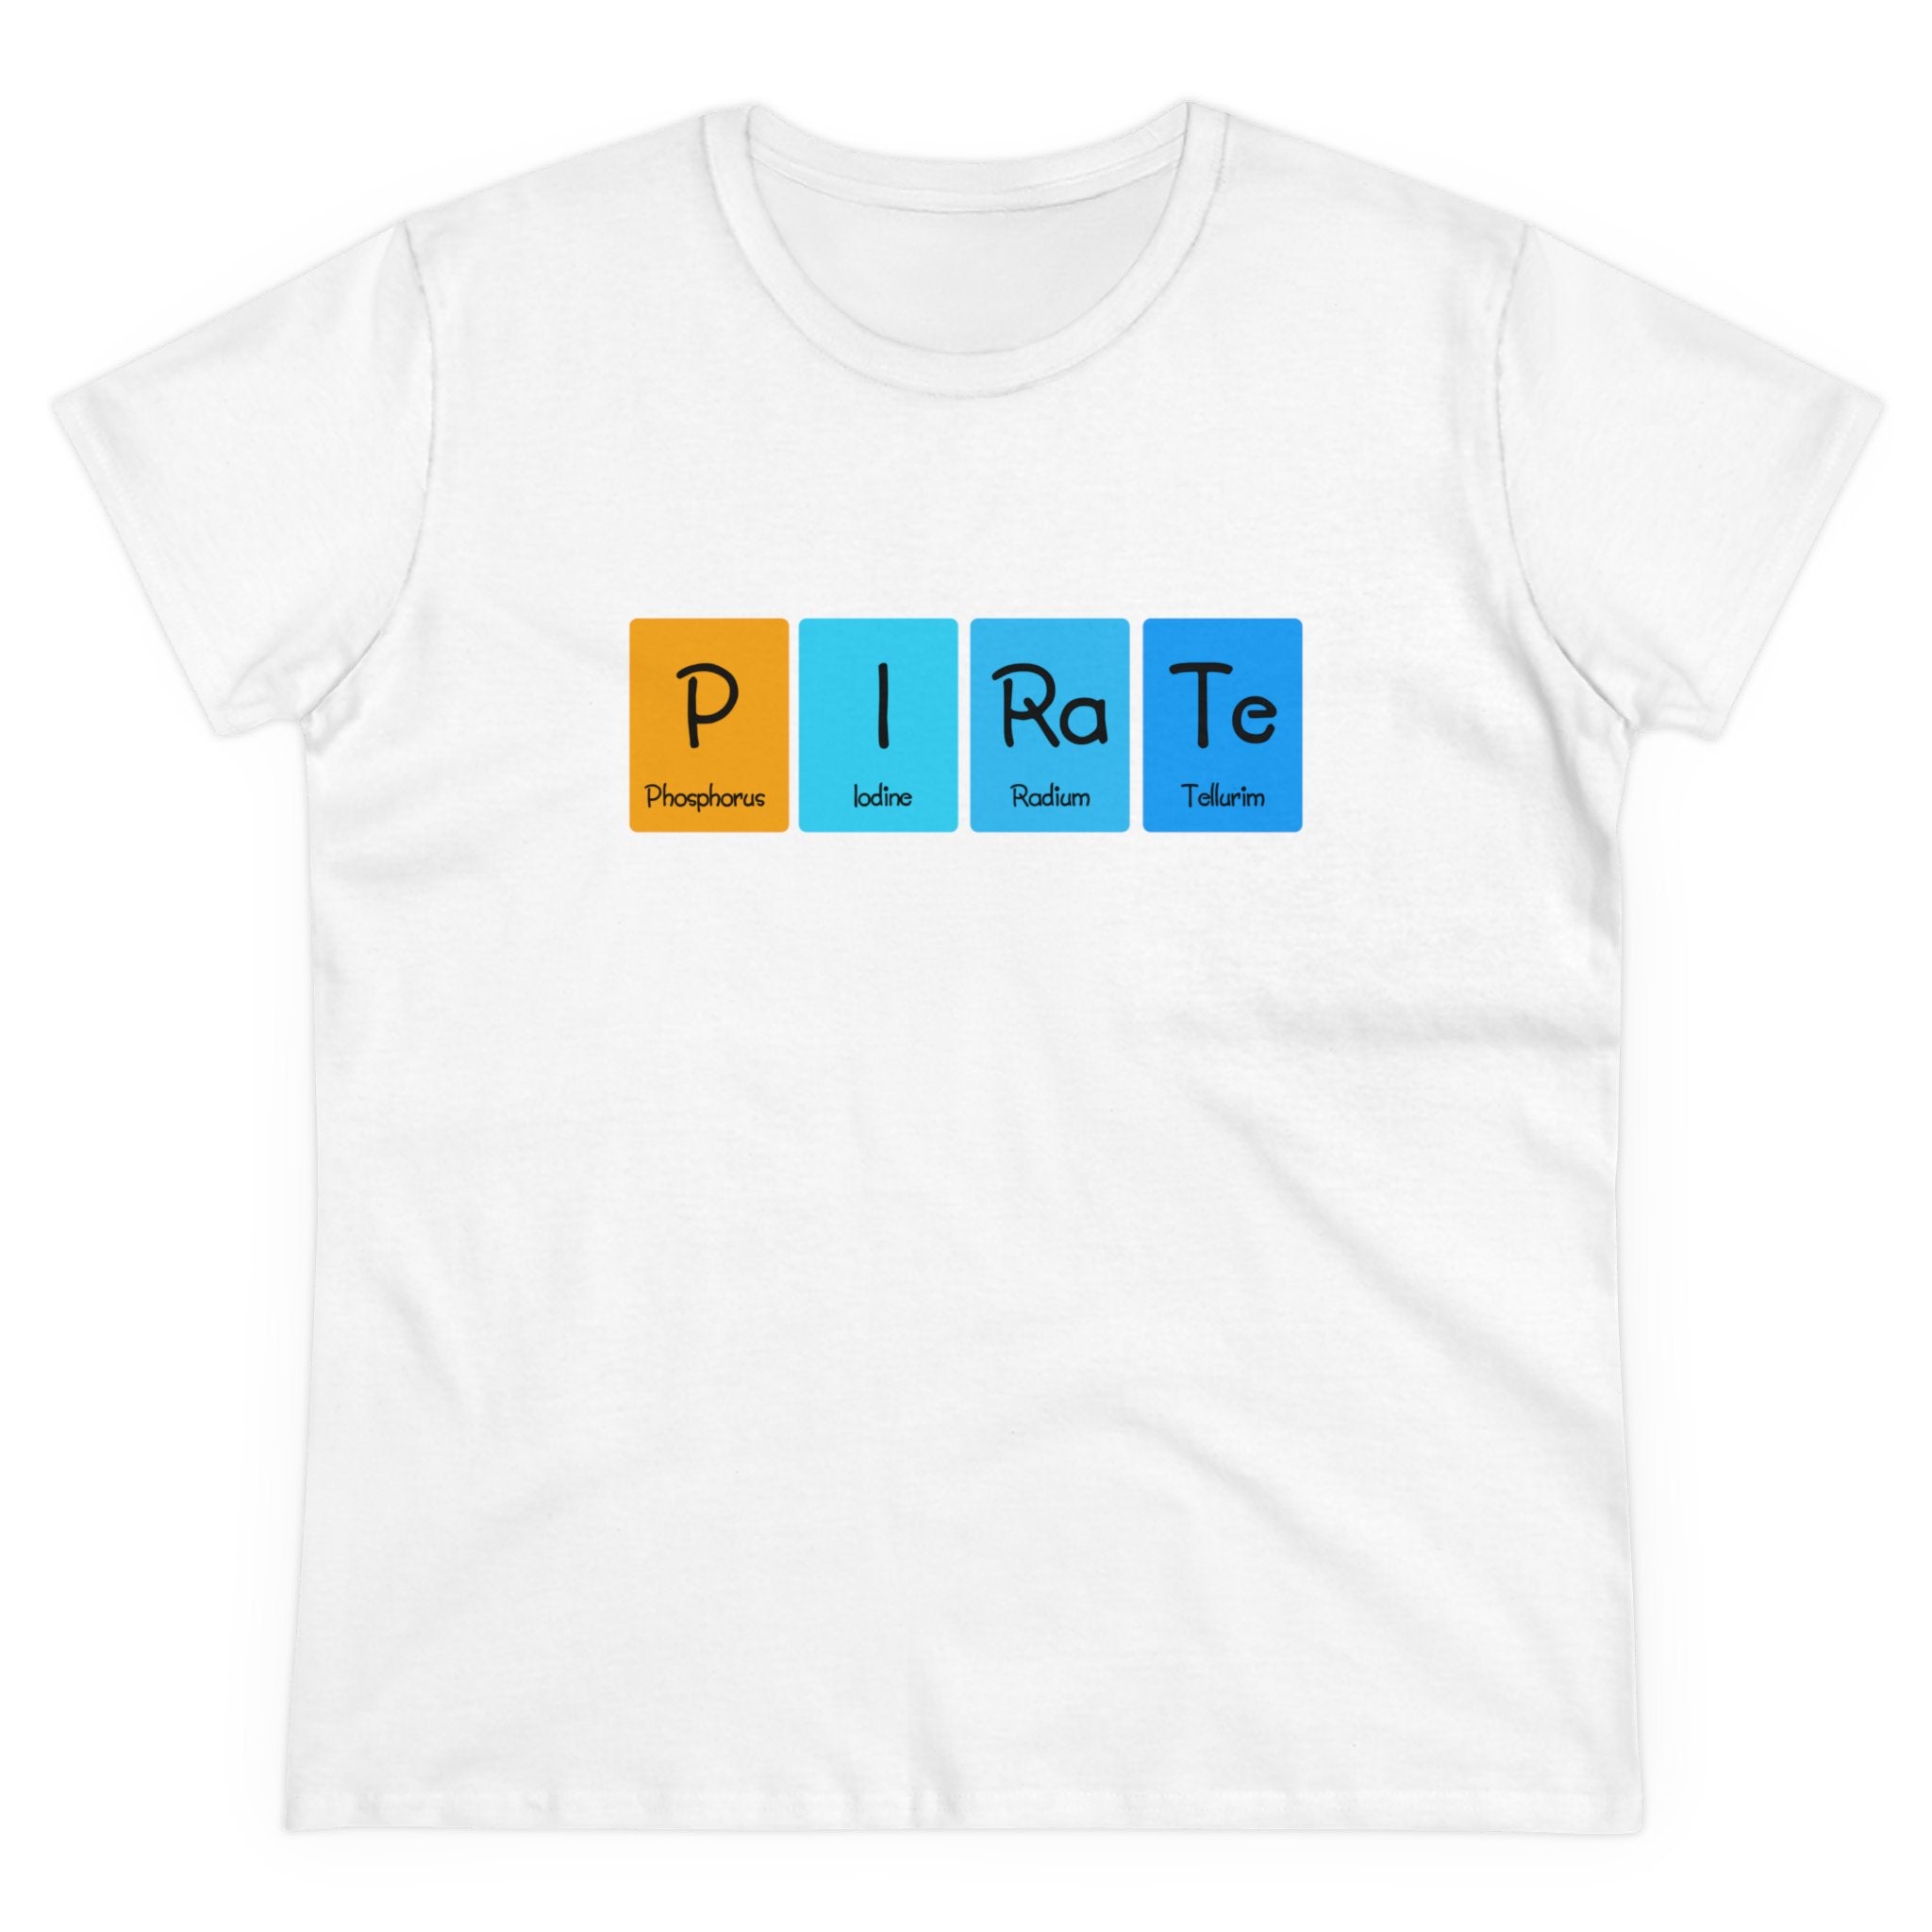 Trendy white P-I-Ra-Te - Women's Tee featuring elements from the periodic table spelling "PIRATE" with symbols for Phosphorus, Iodine, Radium, and Tellurium. Made from ethically grown cotton for a comfortable and sustainable fit.